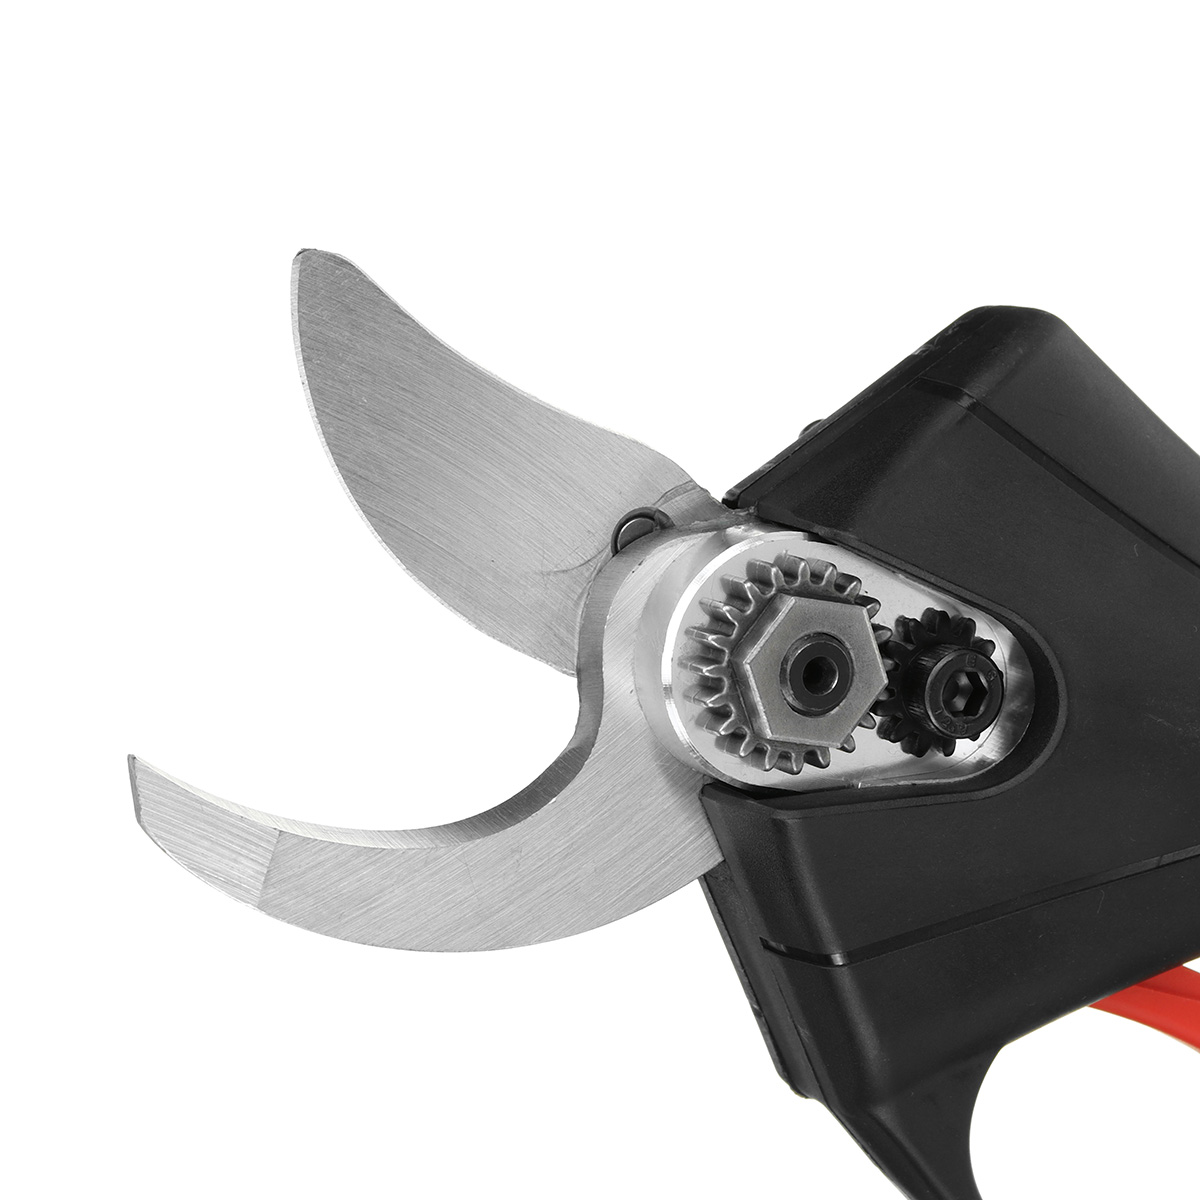 VIOLEWORKS-88VF-Cordless-Electric-Pruning-Shears-Secateur-Branch-Cutter-Scissor-W-2-Battery--Plastic-1725582-7